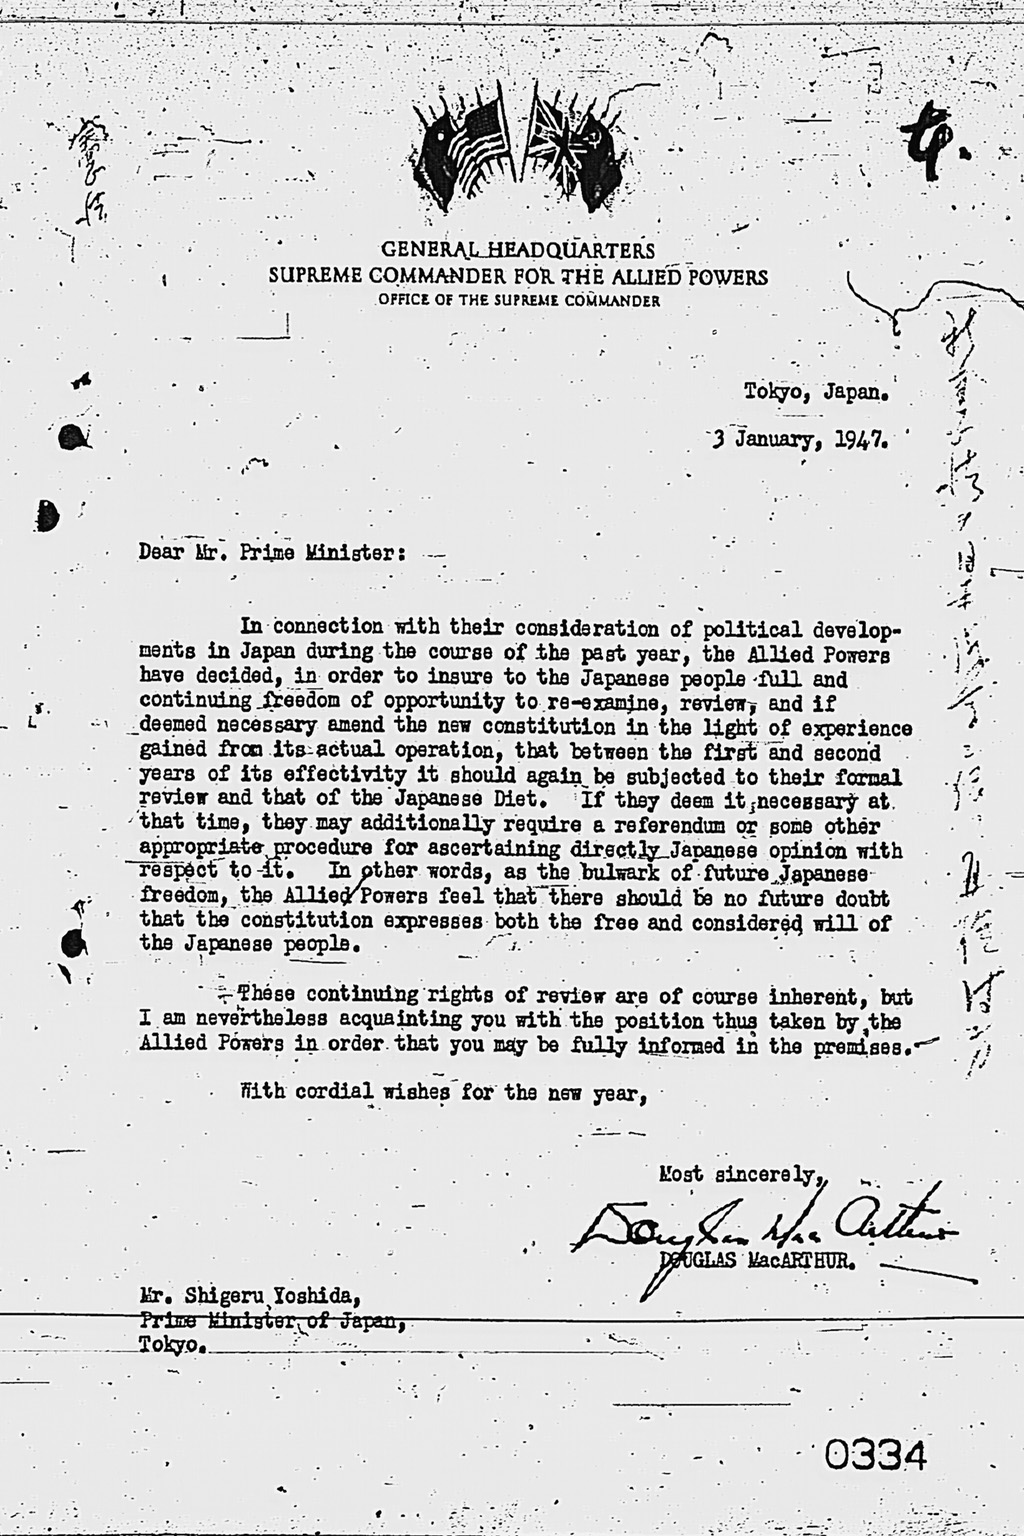 『Letter from Douglas MacArthur to Prime Minister dated 3 January 1947』(拡大画像)